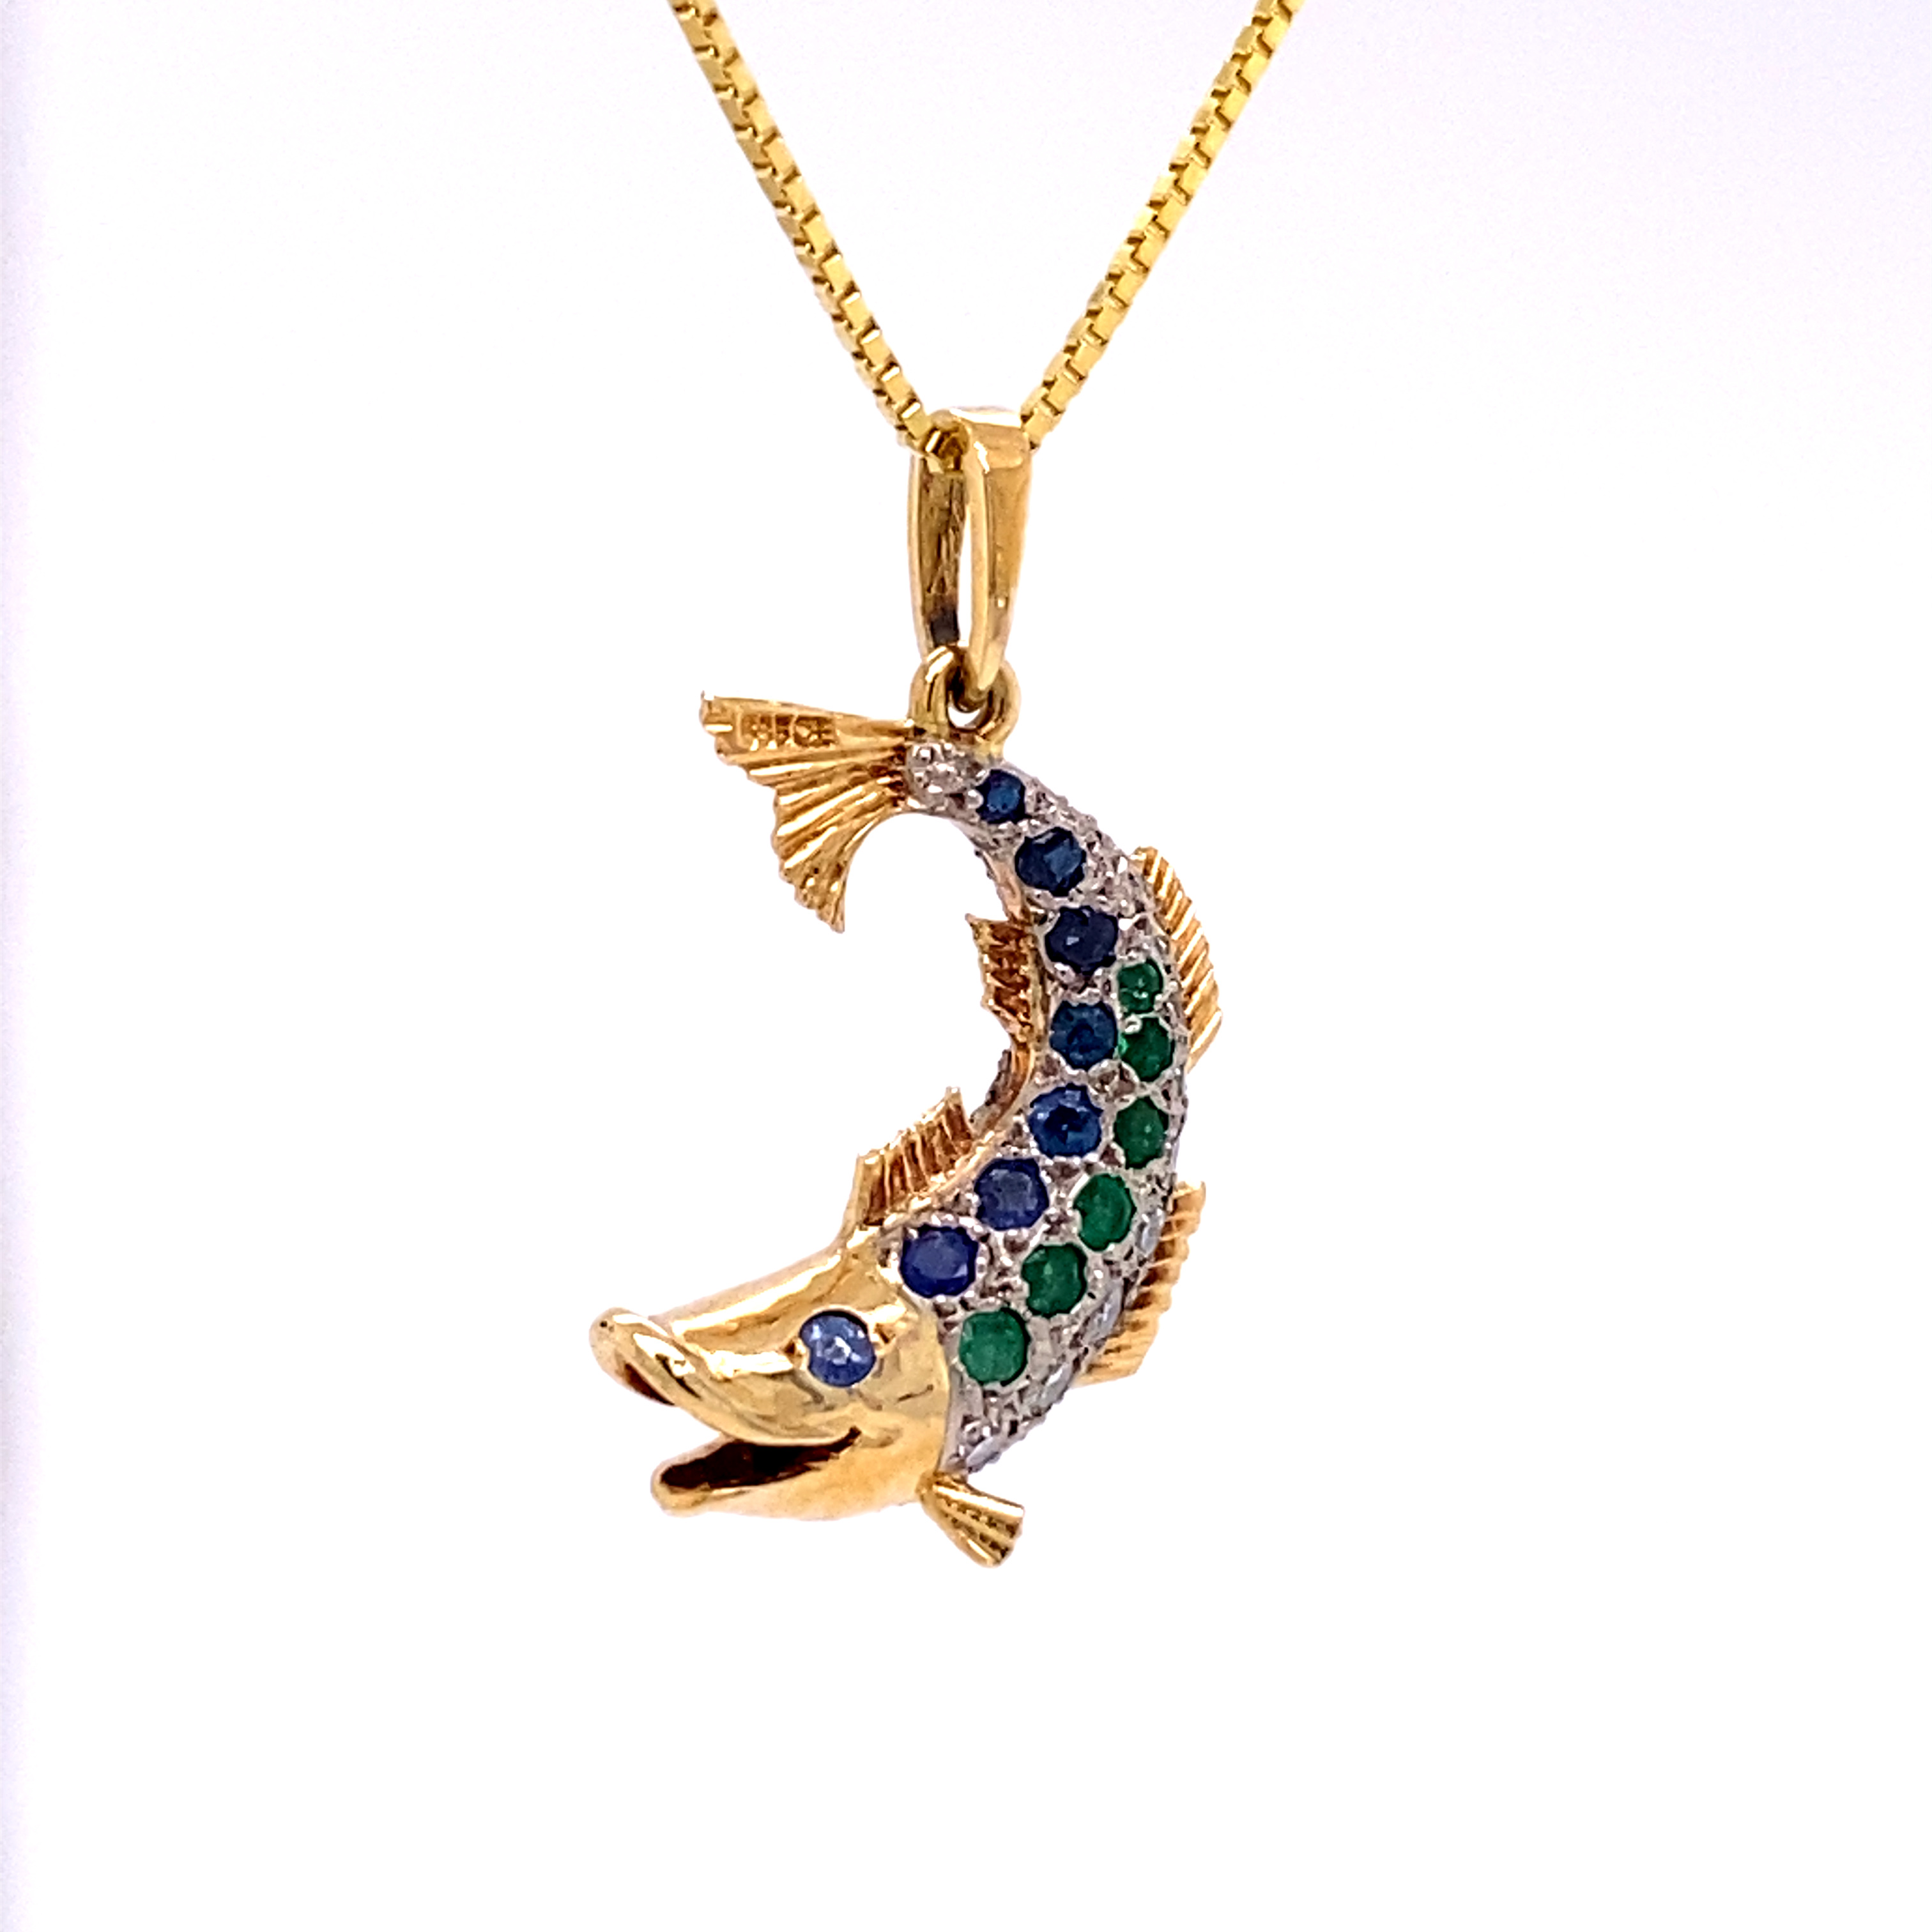 14K Gold Fish - 18 white 8/8 cut Diamonds total 0.50ct - 16 Blue Sapphires total 0.40ct. -12 Emeralds total 0.30ct.